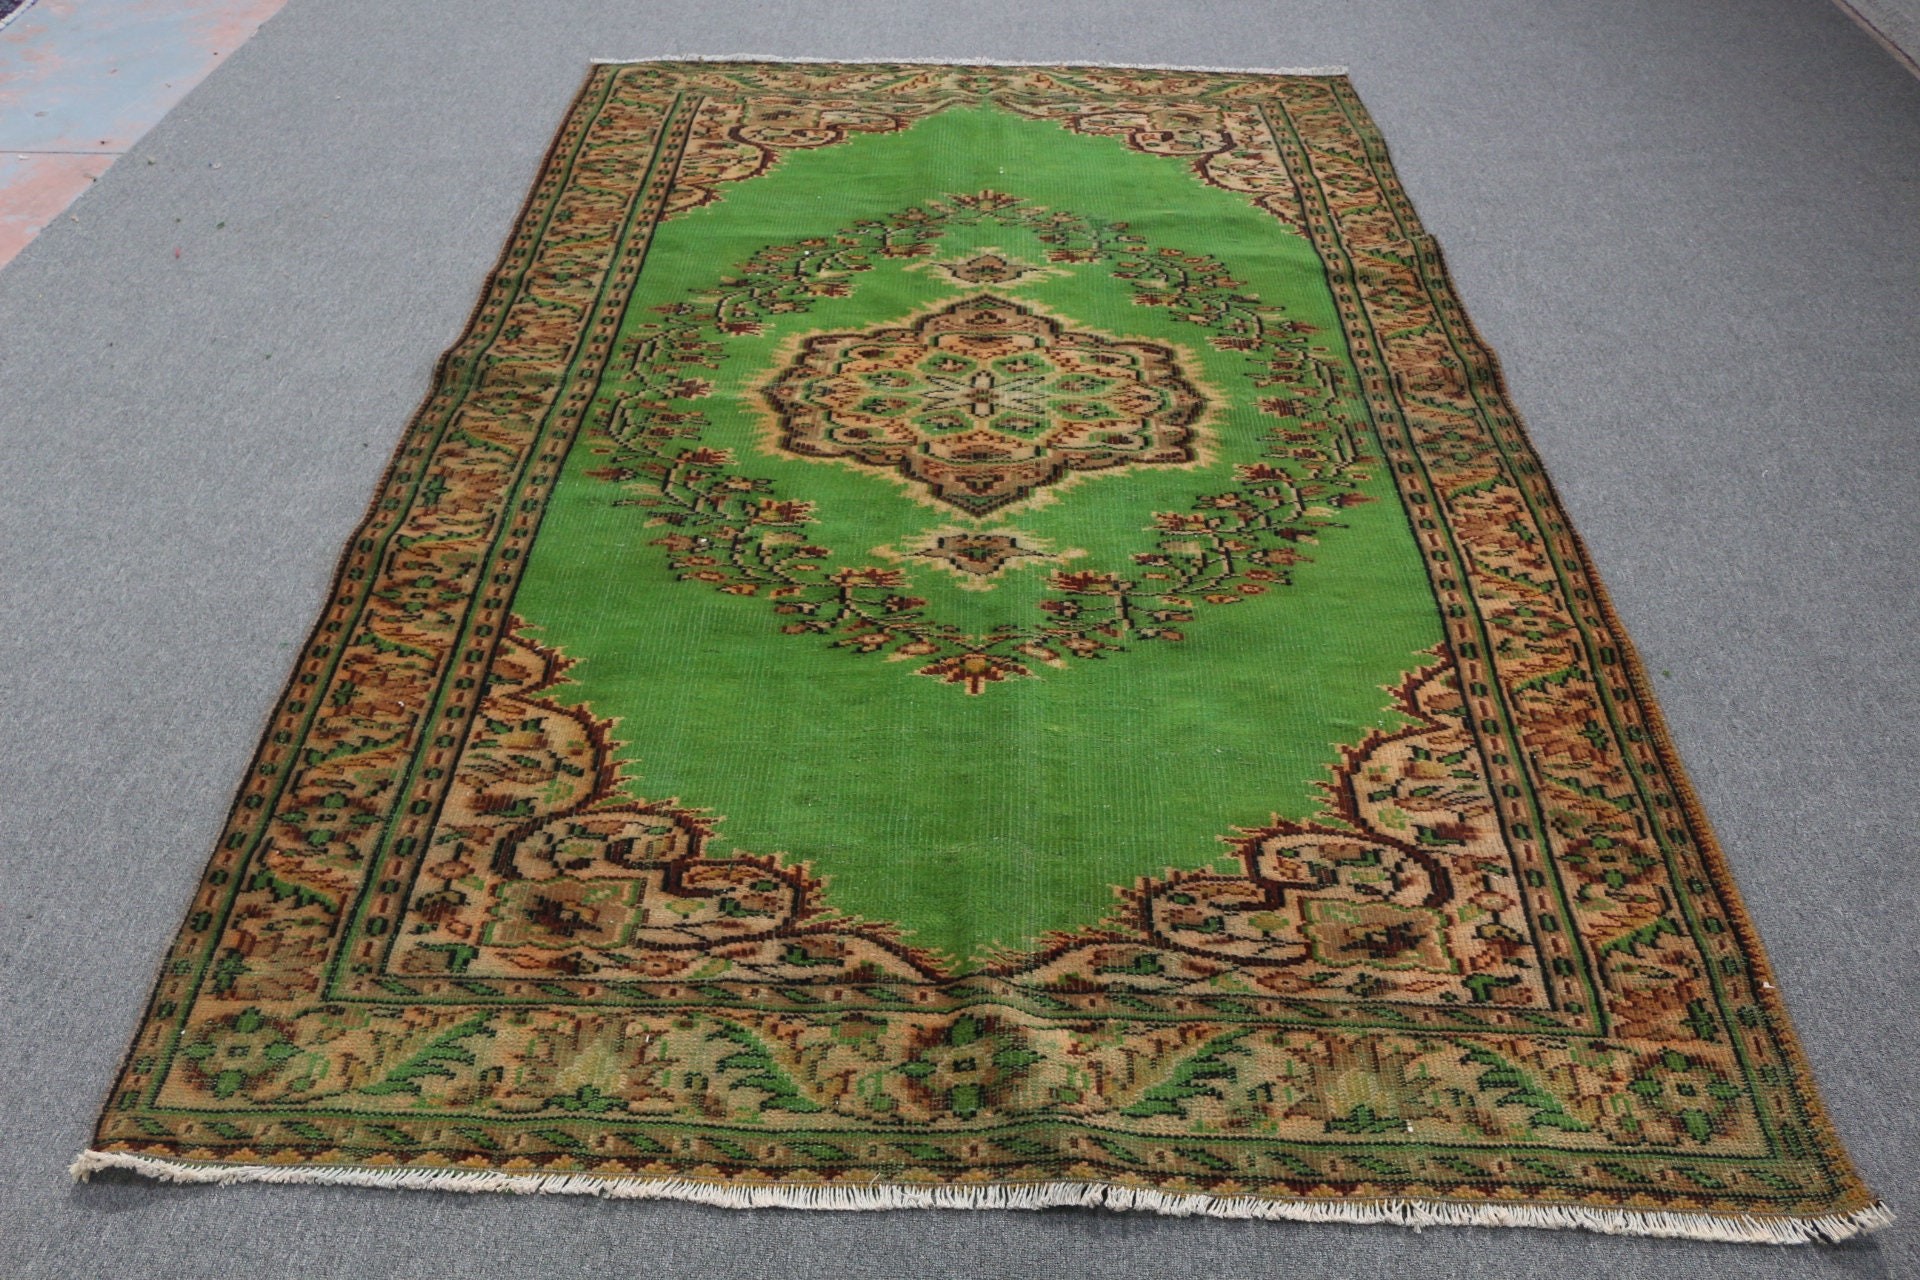 Rugs for Salon, Green Anatolian Rugs, Salon Rugs, Turkish Rugs, 5.7x9 ft Large Rugs, Oushak Rugs, Vintage Rugs, Bedroom Rugs